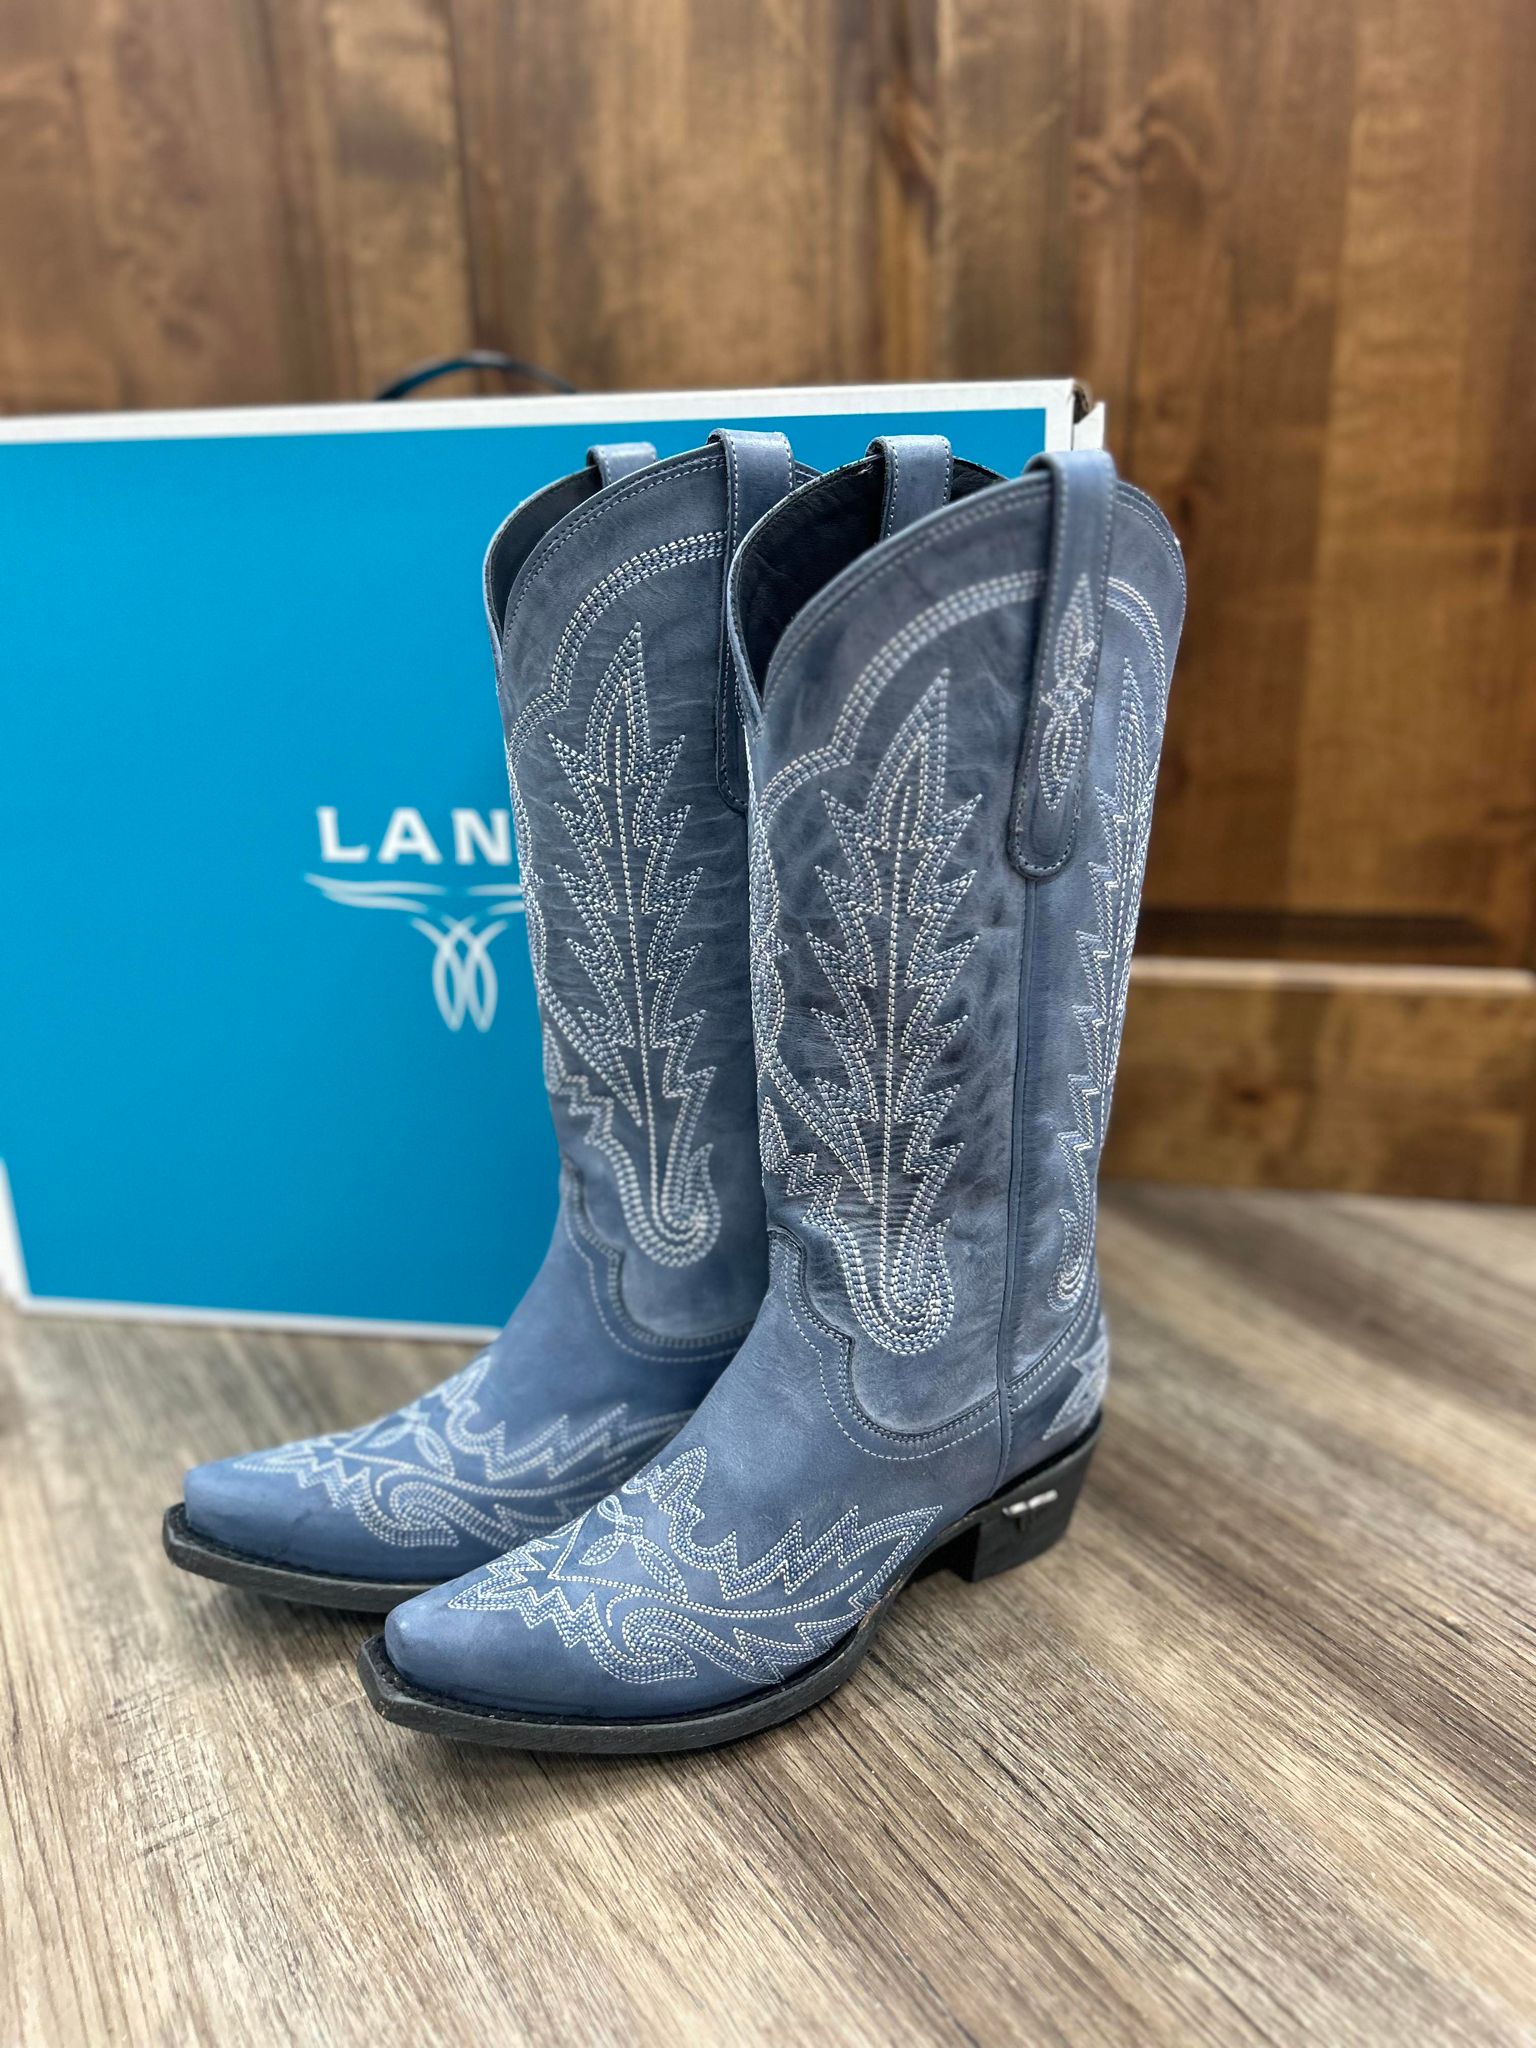 Lane Boots Lexington in Washed Denim-Women's Boots-Lane Boots-Lucky J Boots & More, Women's, Men's, & Kids Western Store Located in Carthage, MO